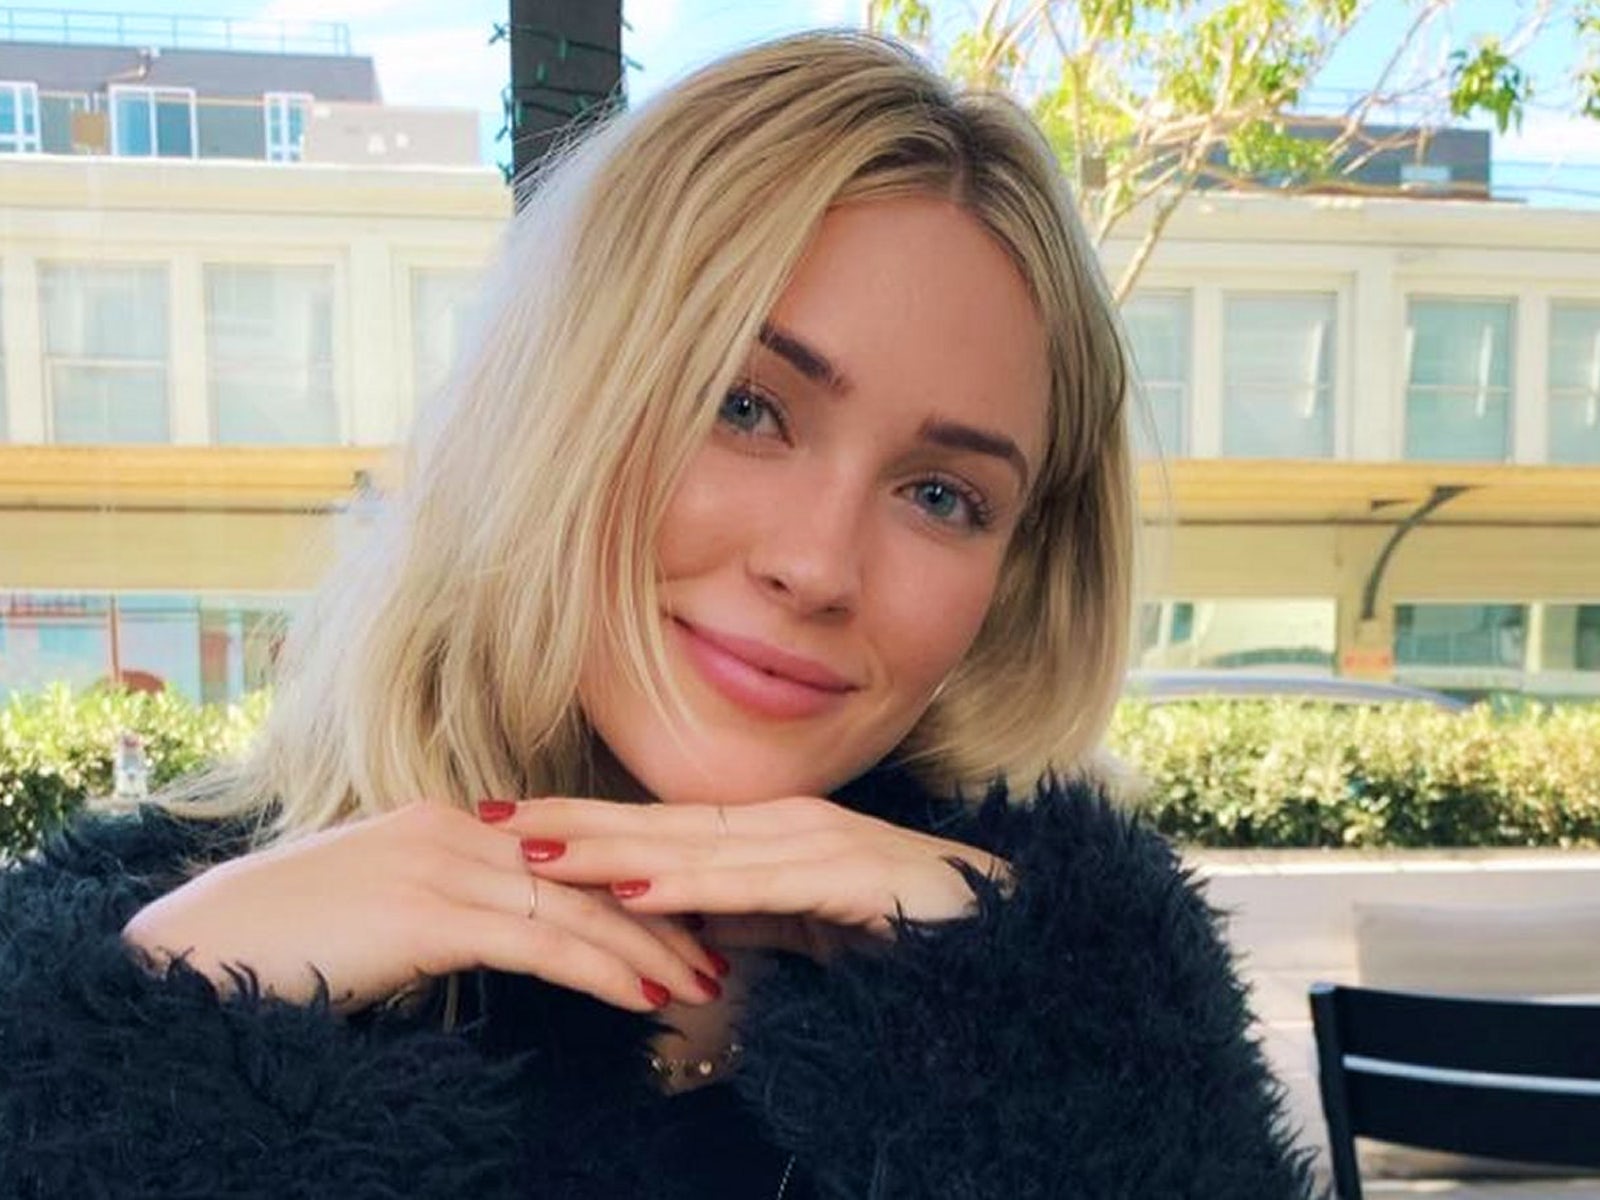 The Bachelor Alum Cassie Randolph Accuses Colton Underwood Of Double Standard And Trying To